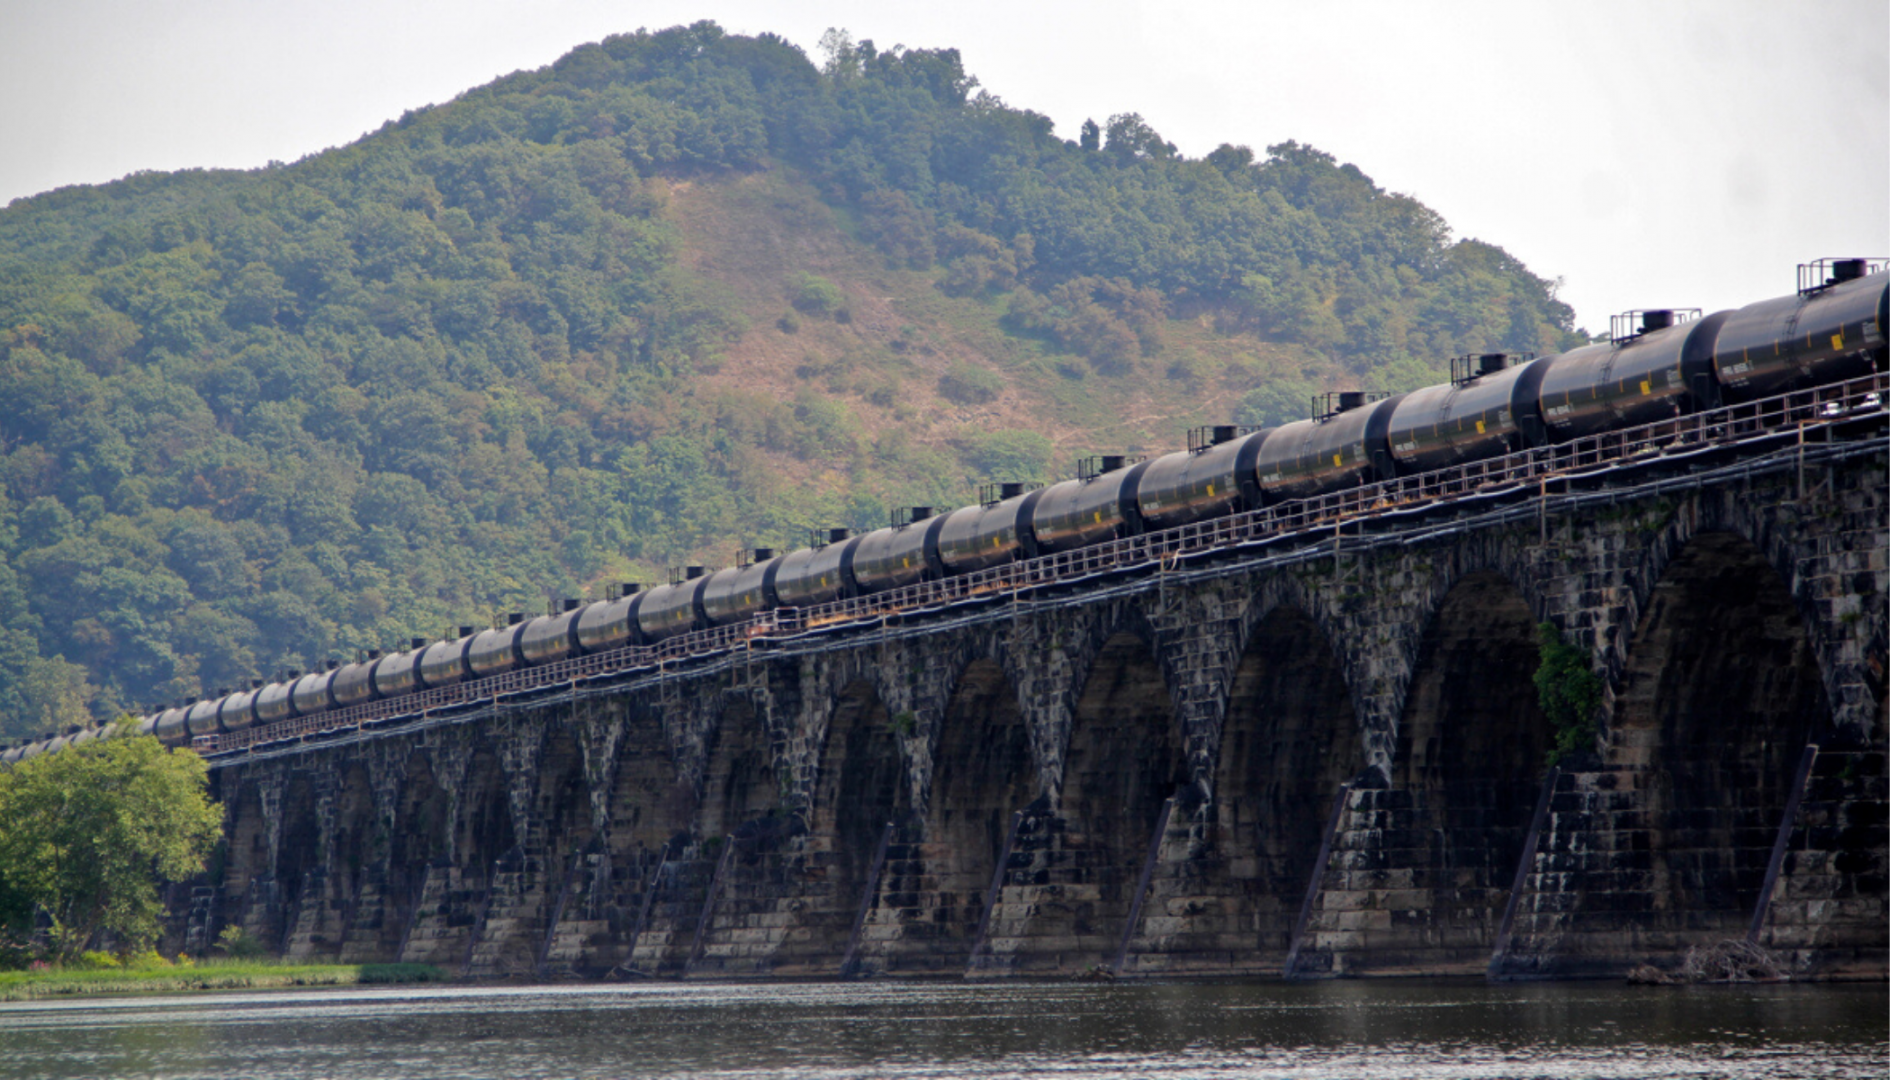 A tanker train crosses the Susquehanna River in Pennsylvania. A proposed new rule that would allow liquefied natural gas to be transported by rail is being challenged because safety and risk assessments have not been done.